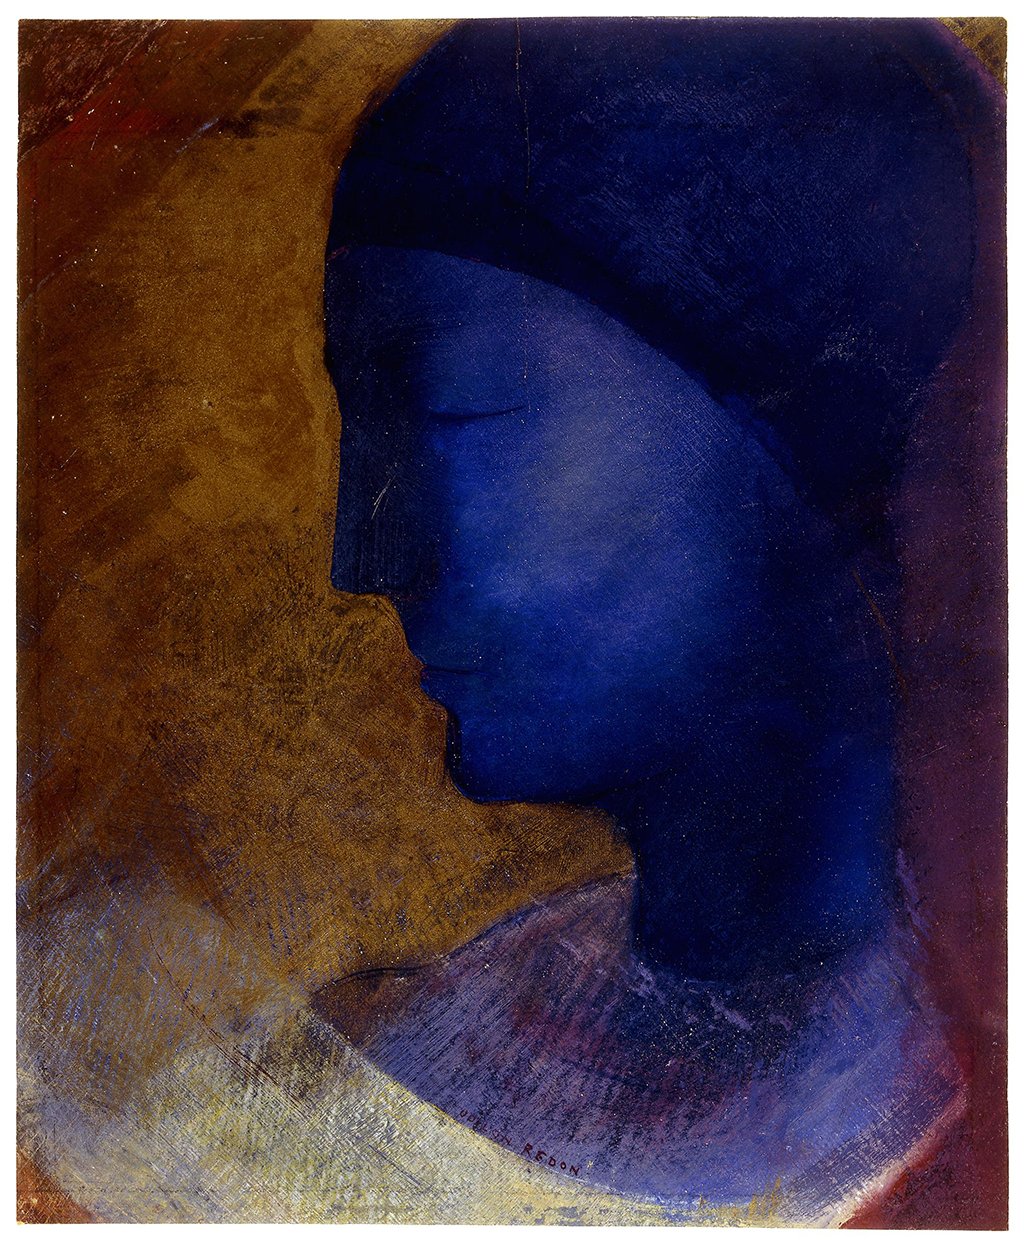 A painting of a the side of a woman’s face. Her eyes are shut, and her face is painted in blue. The background consists of different shades of yellow, red, white, and purple.